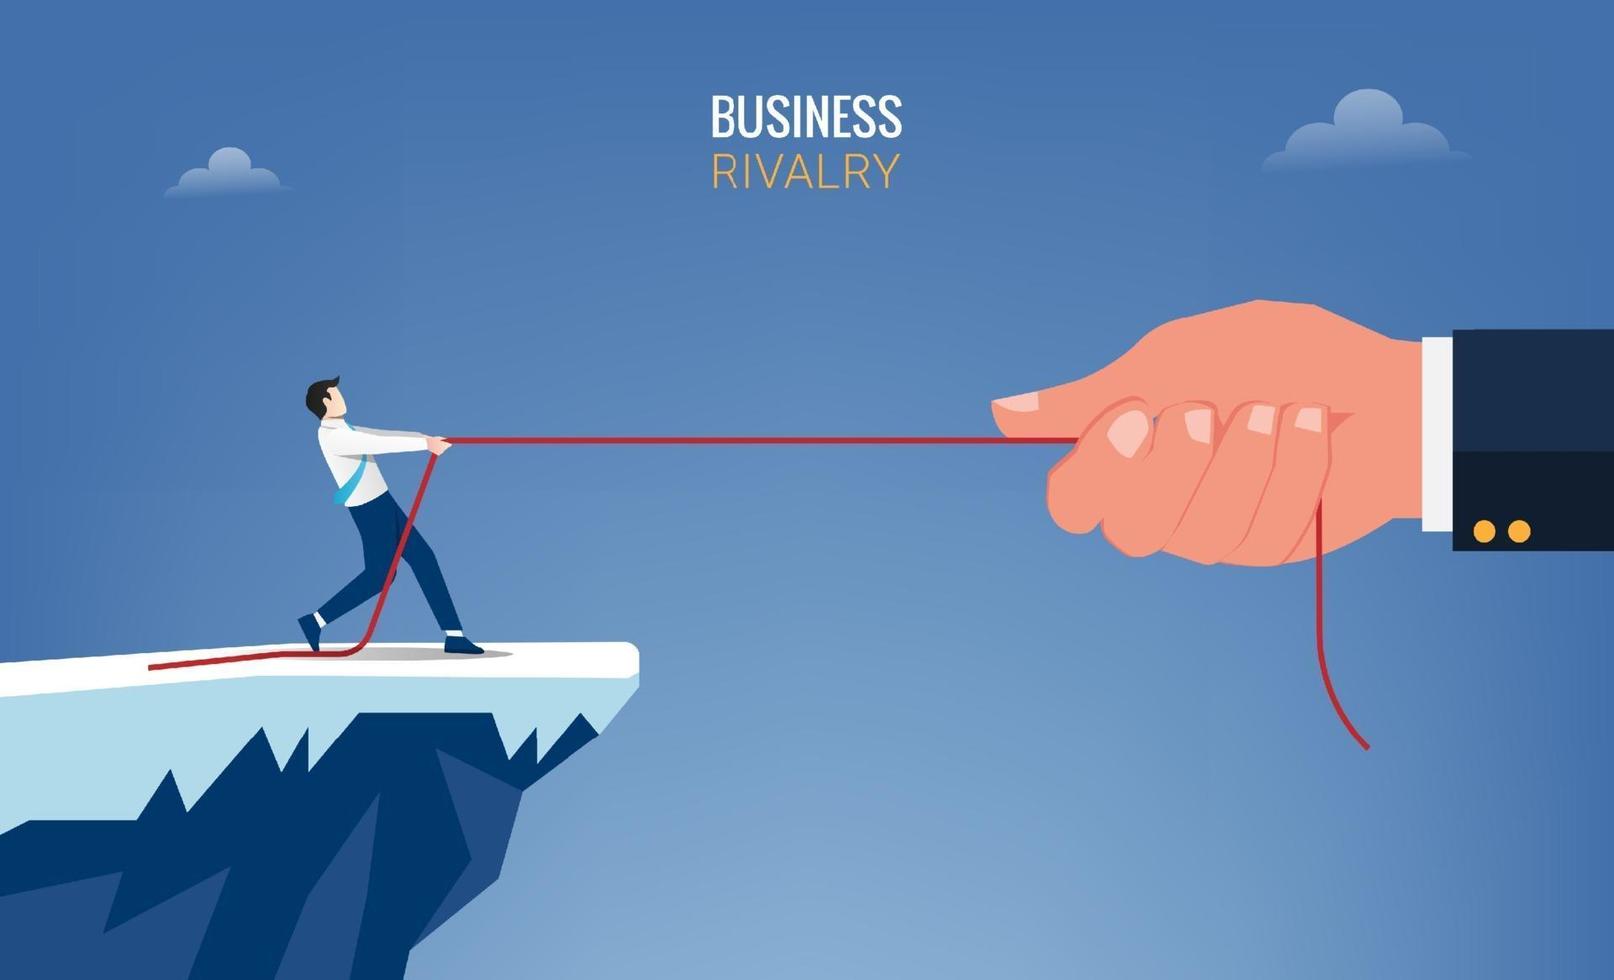 Businessman and big hand pull the rope concept. Business rivalry symbol vector illustration